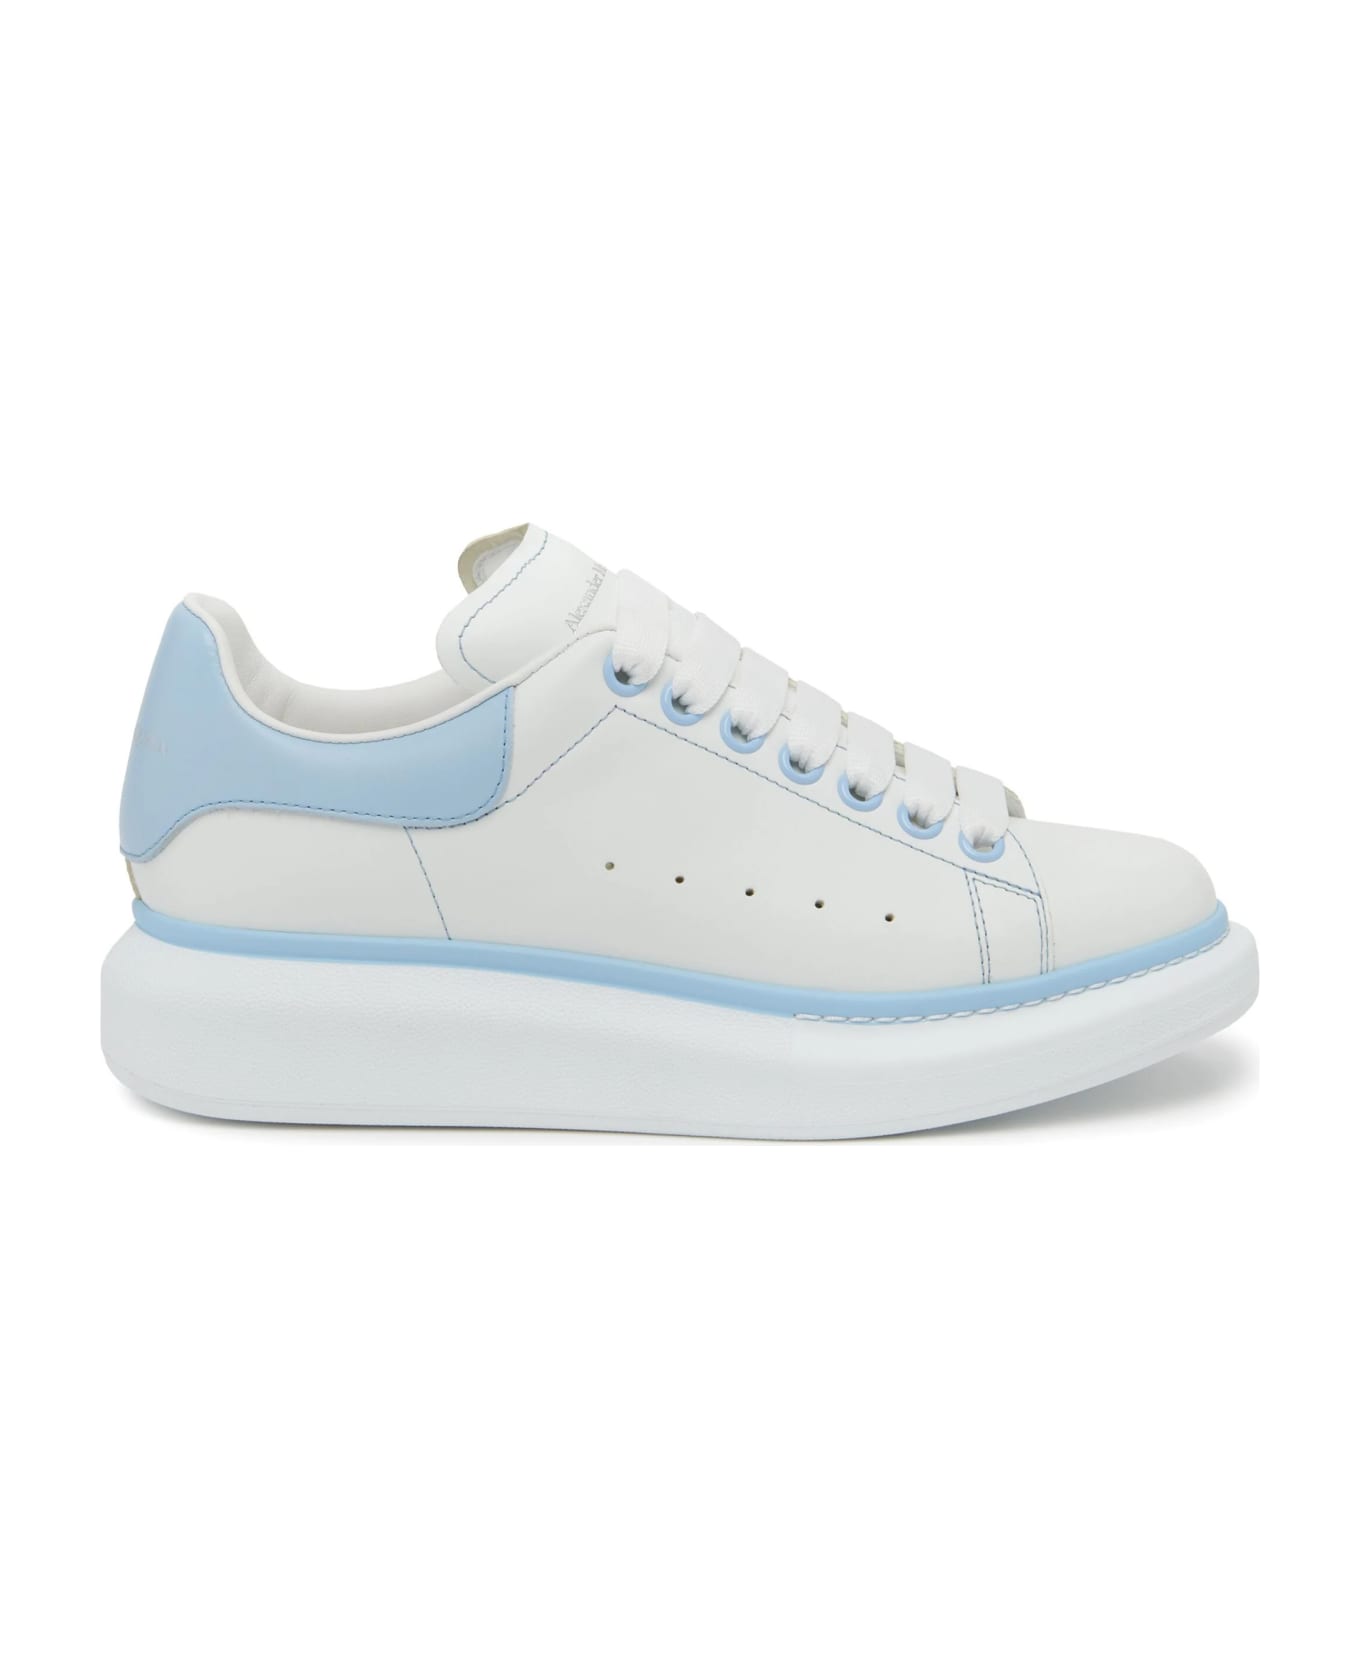 Alexander McQueen White Oversized Sneakers With Powder Blue Details - White